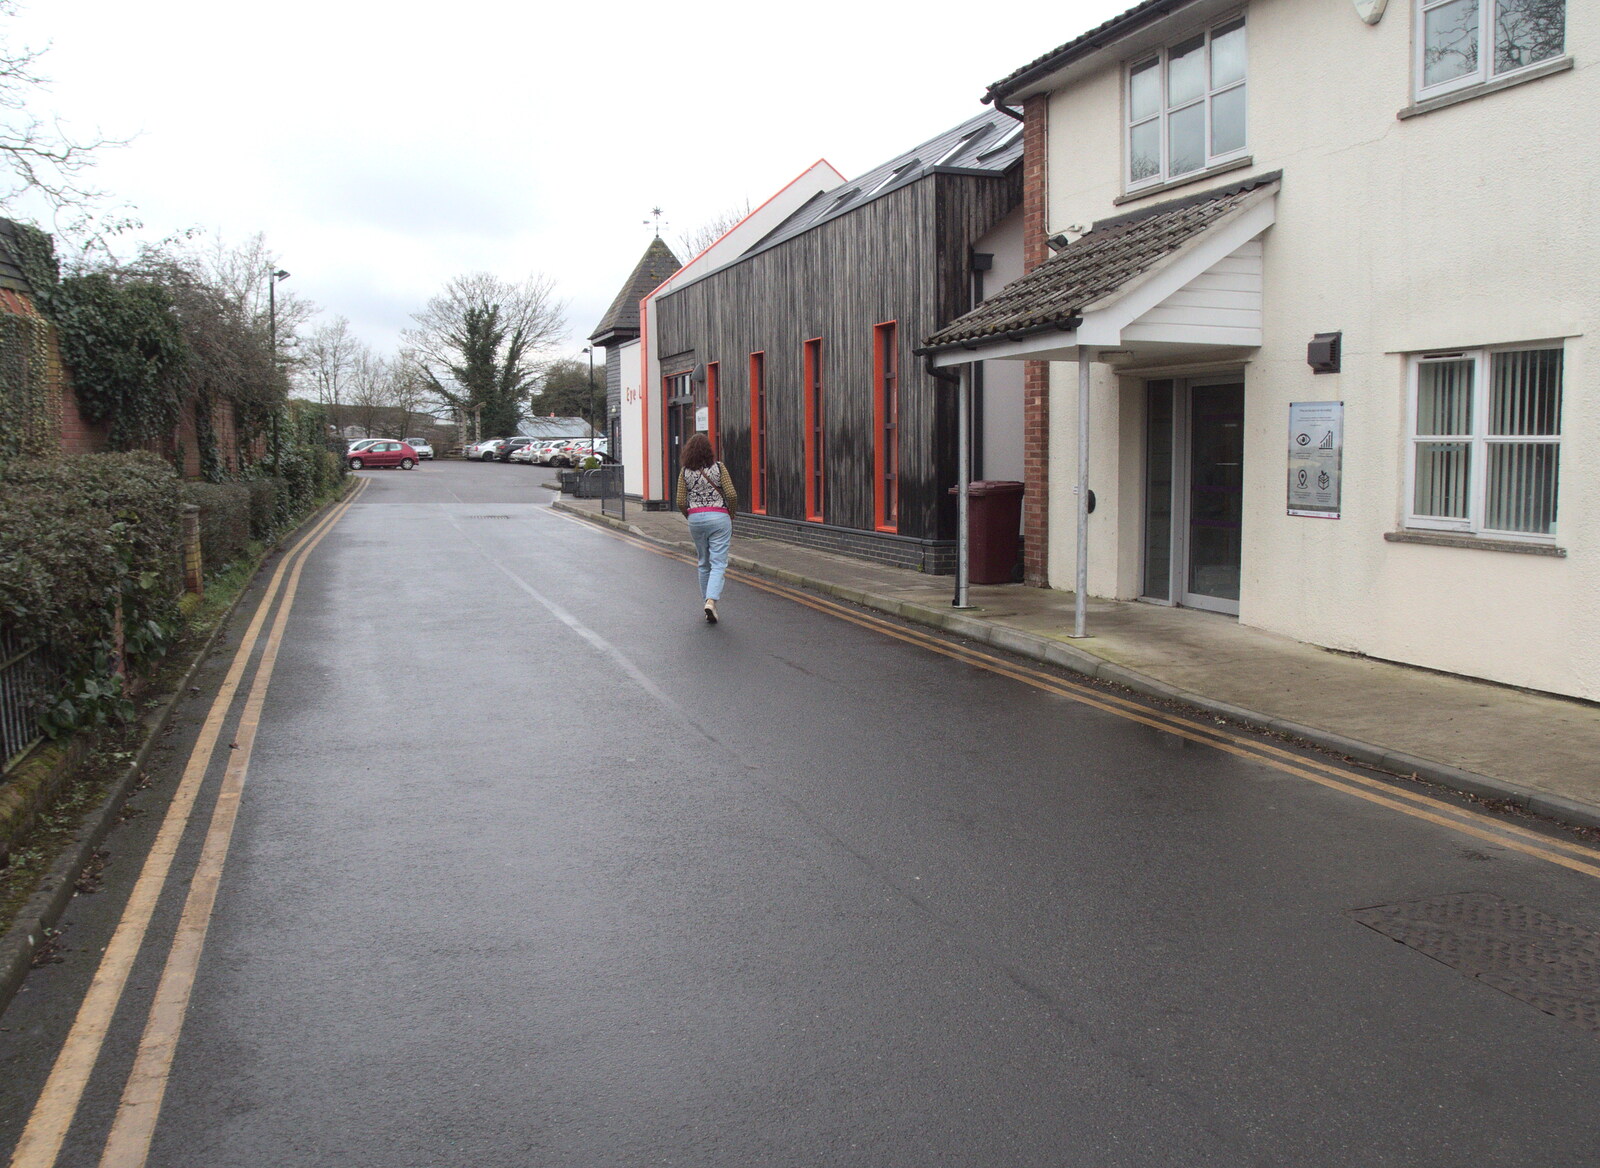 Isobel heads back to the car park from The Lost Pubs of Norwich, Norfolk - 13th February 2022